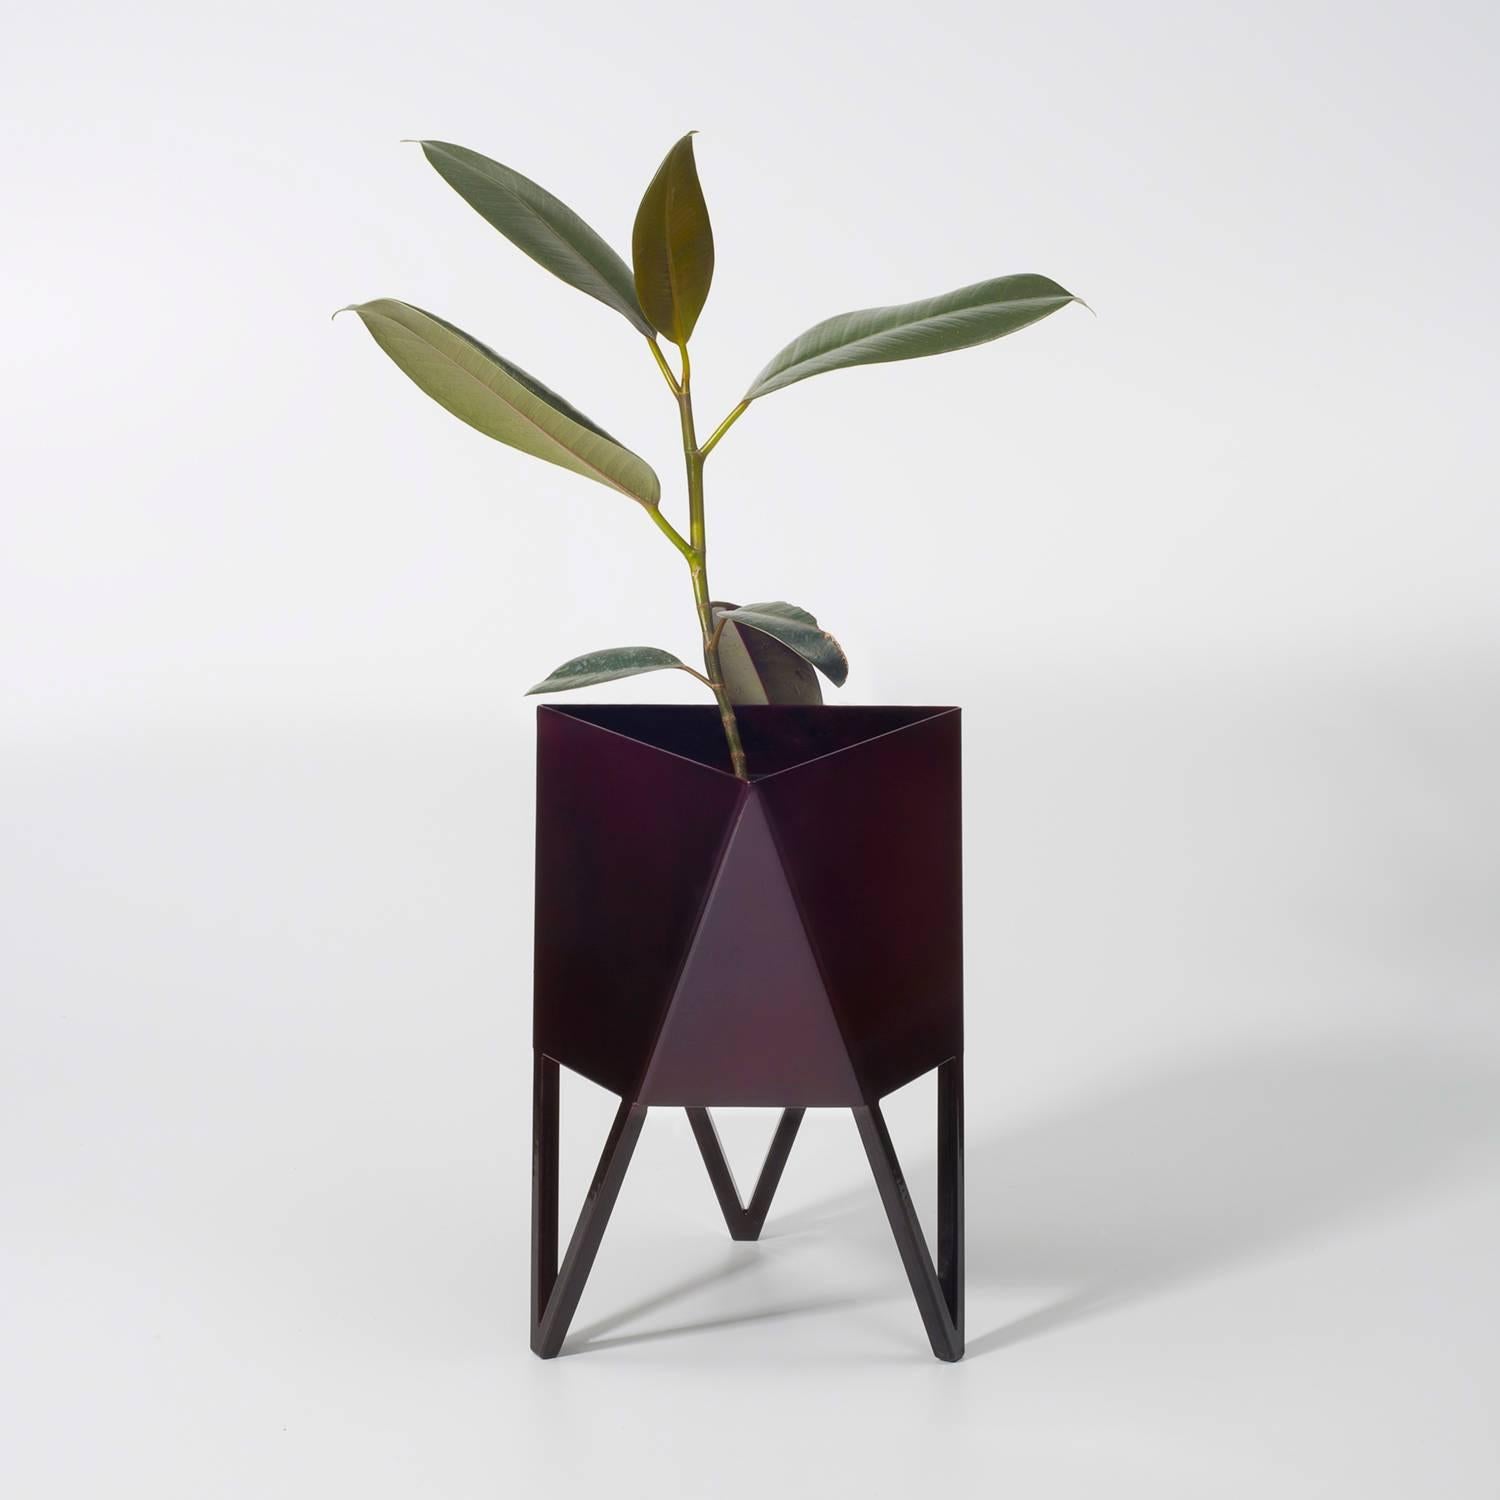 Contemporary Deca Planter in Bluegreen Steel, Medium, by Force/Collide